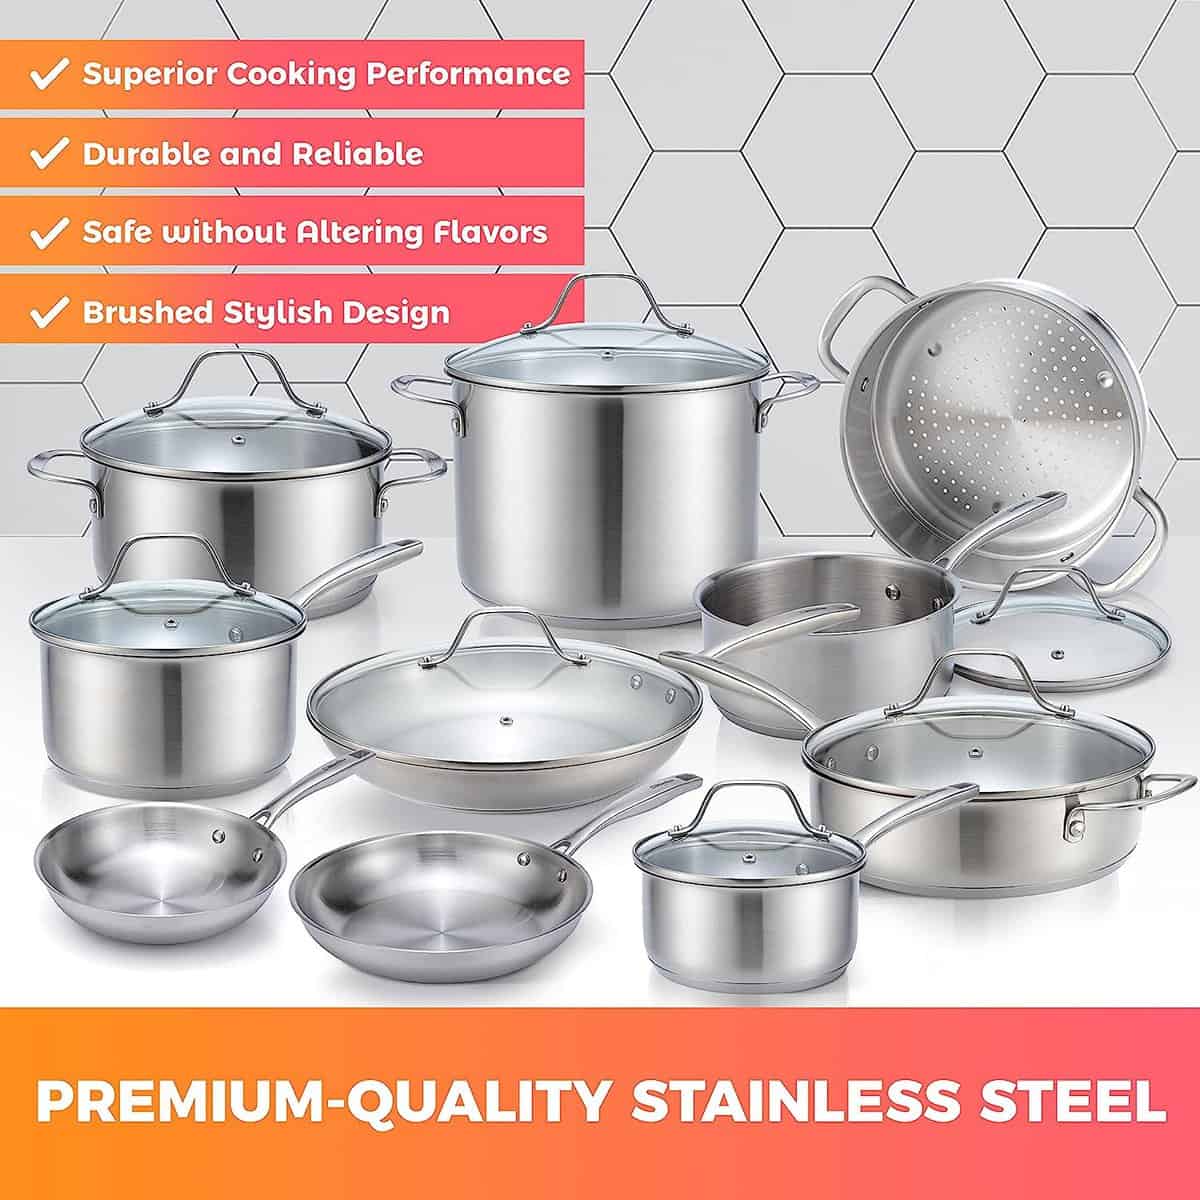 Ultra-Clad Pro Stainless Steel Cookware Set, Ergonomic EverCool Handle, Includes Saucepans, Skillets, Dutch Oven, Stockpot, Steamer More